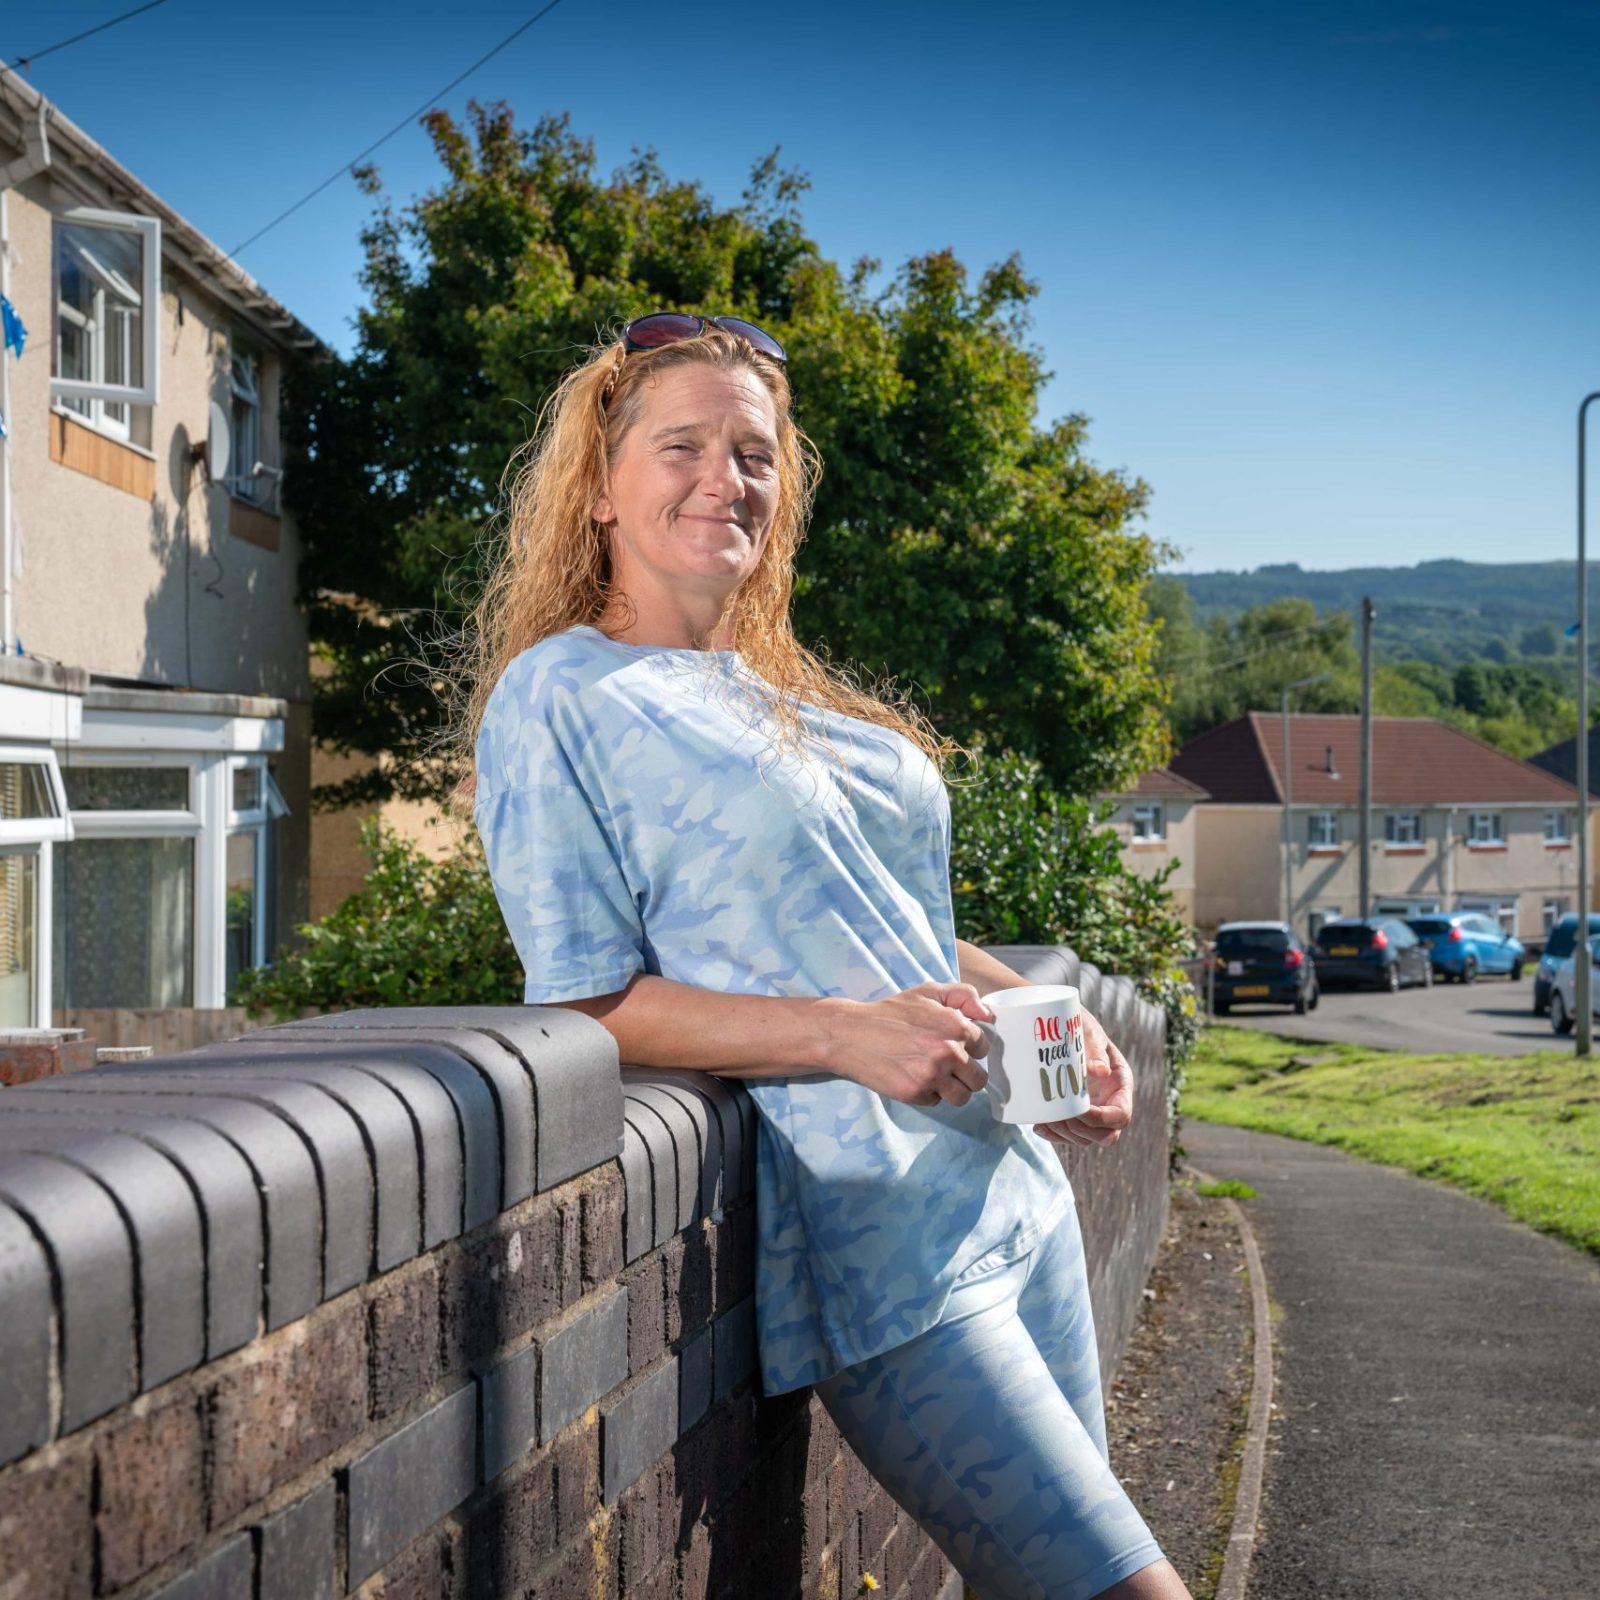 Trivallis Housing Landlord Wales A smiling woman holding a mug stands leaning on a brick wall on a sunny RCT suburban street.